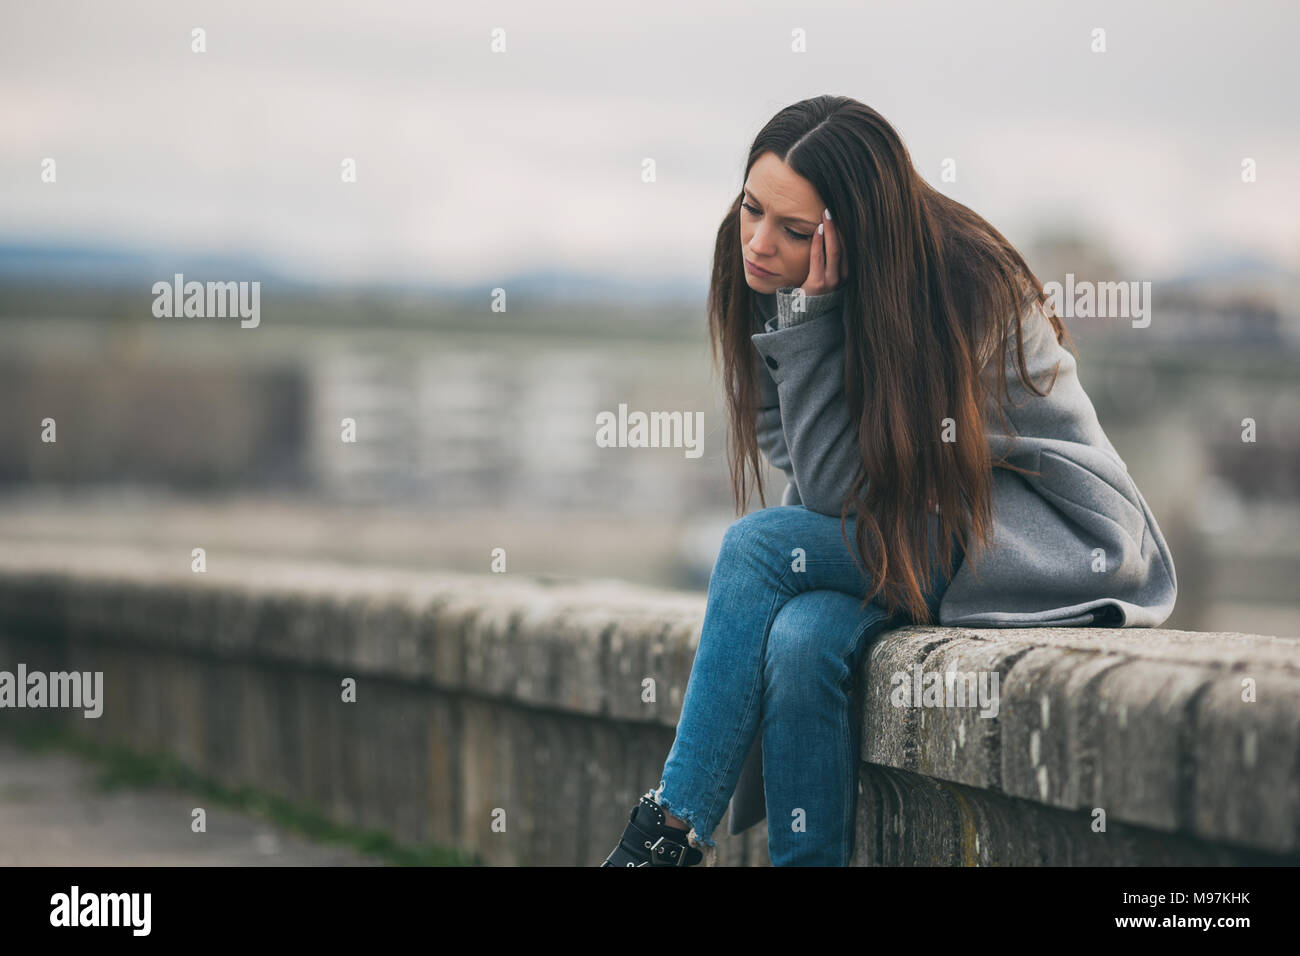 Young lonely and depressed woman is sitting in grief. Stock Photo